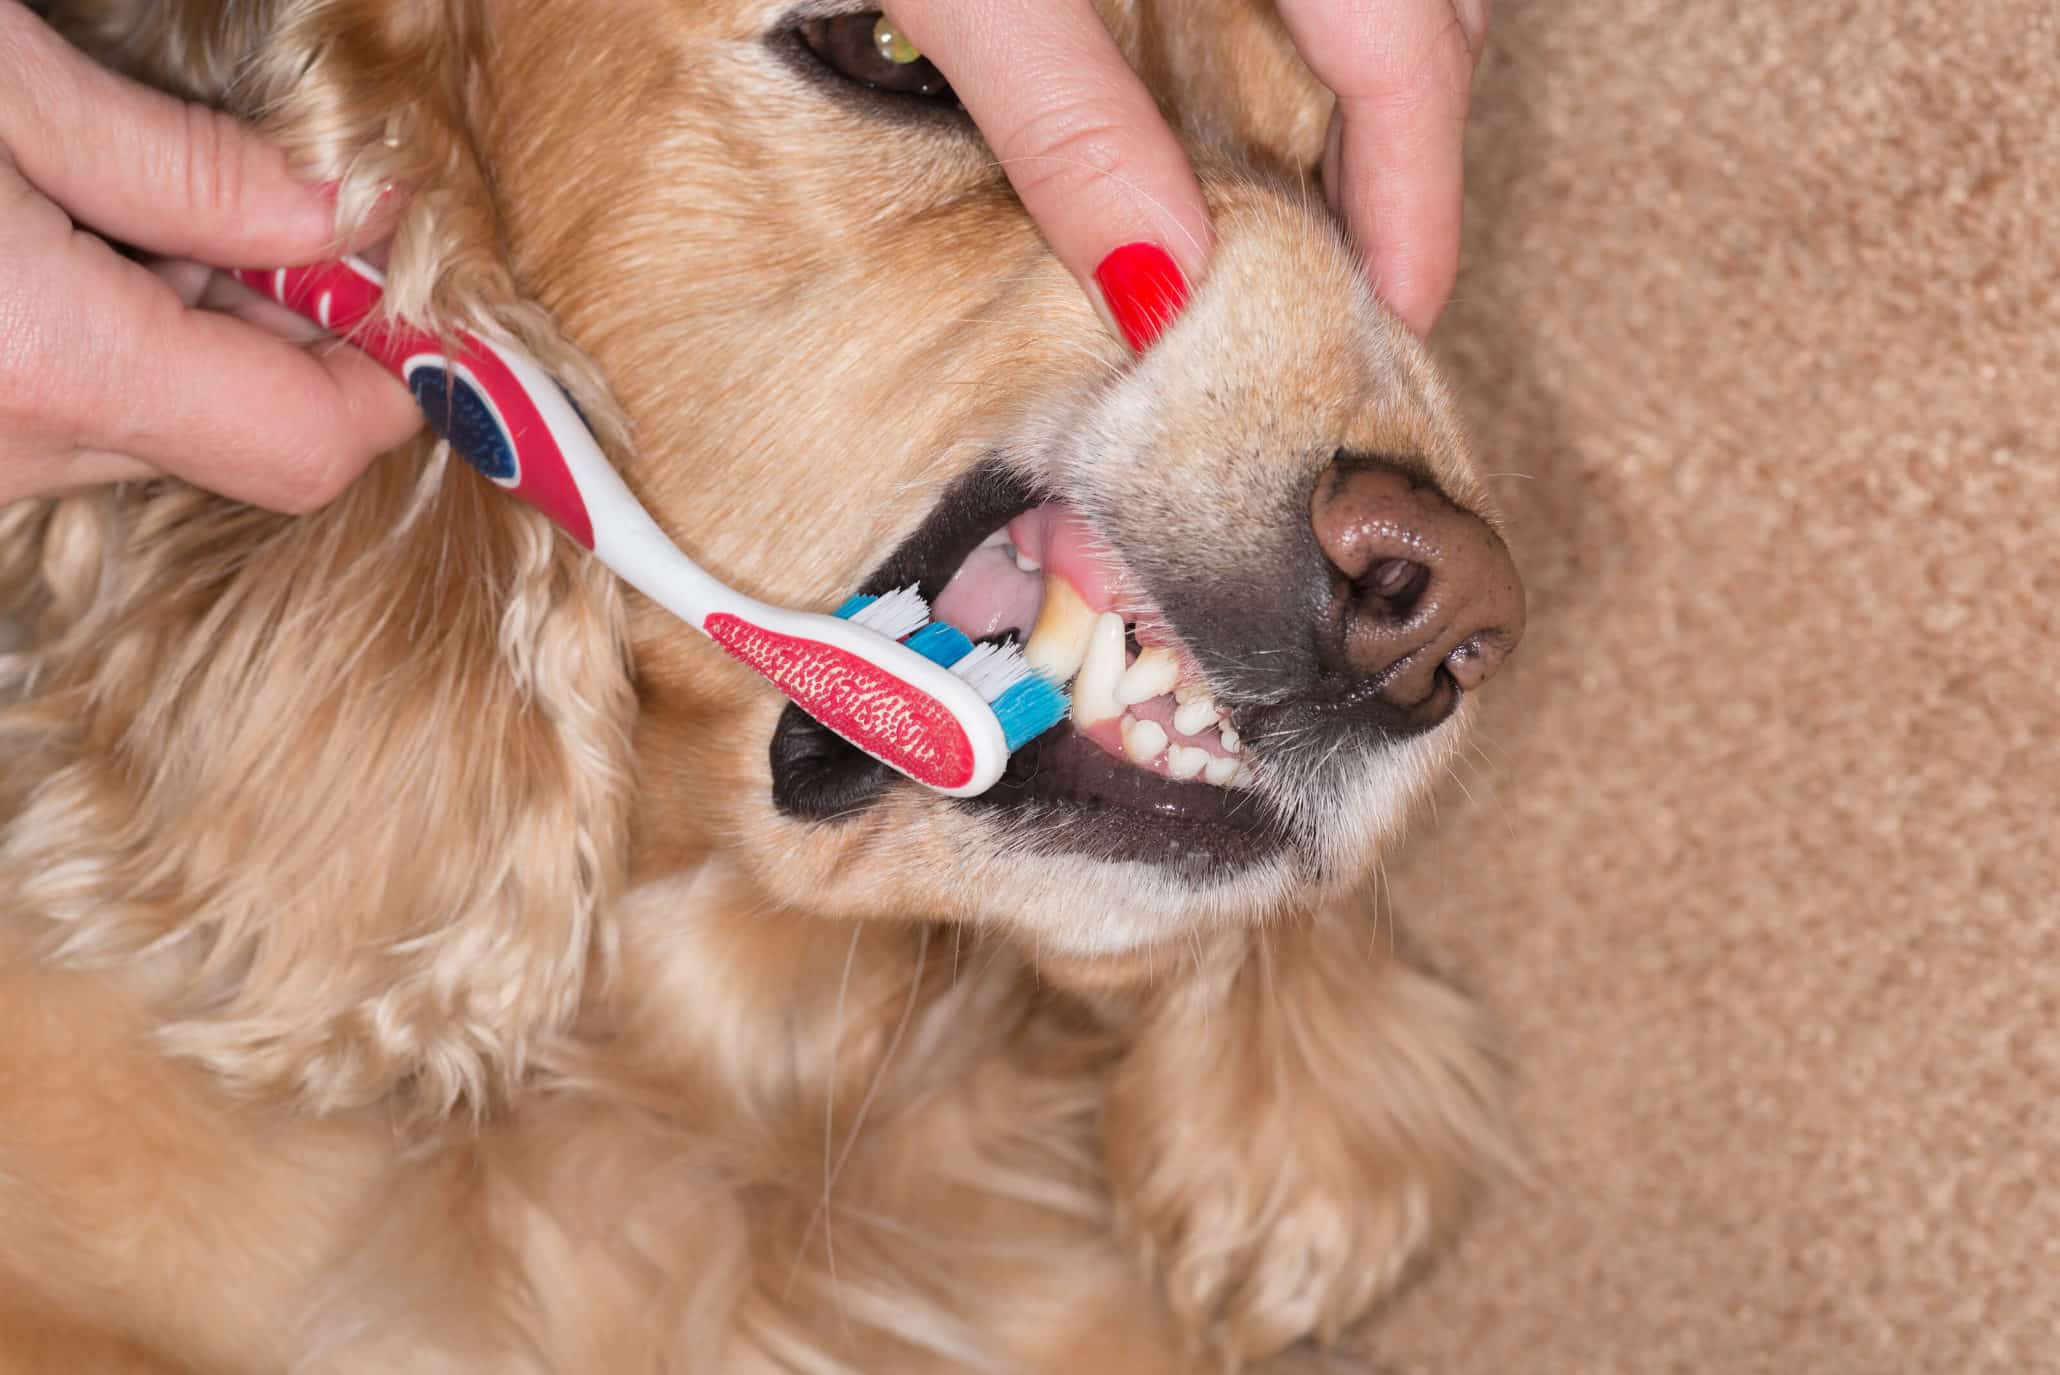 Dog Grooming Chicago - Teeth Brushing for Dogs